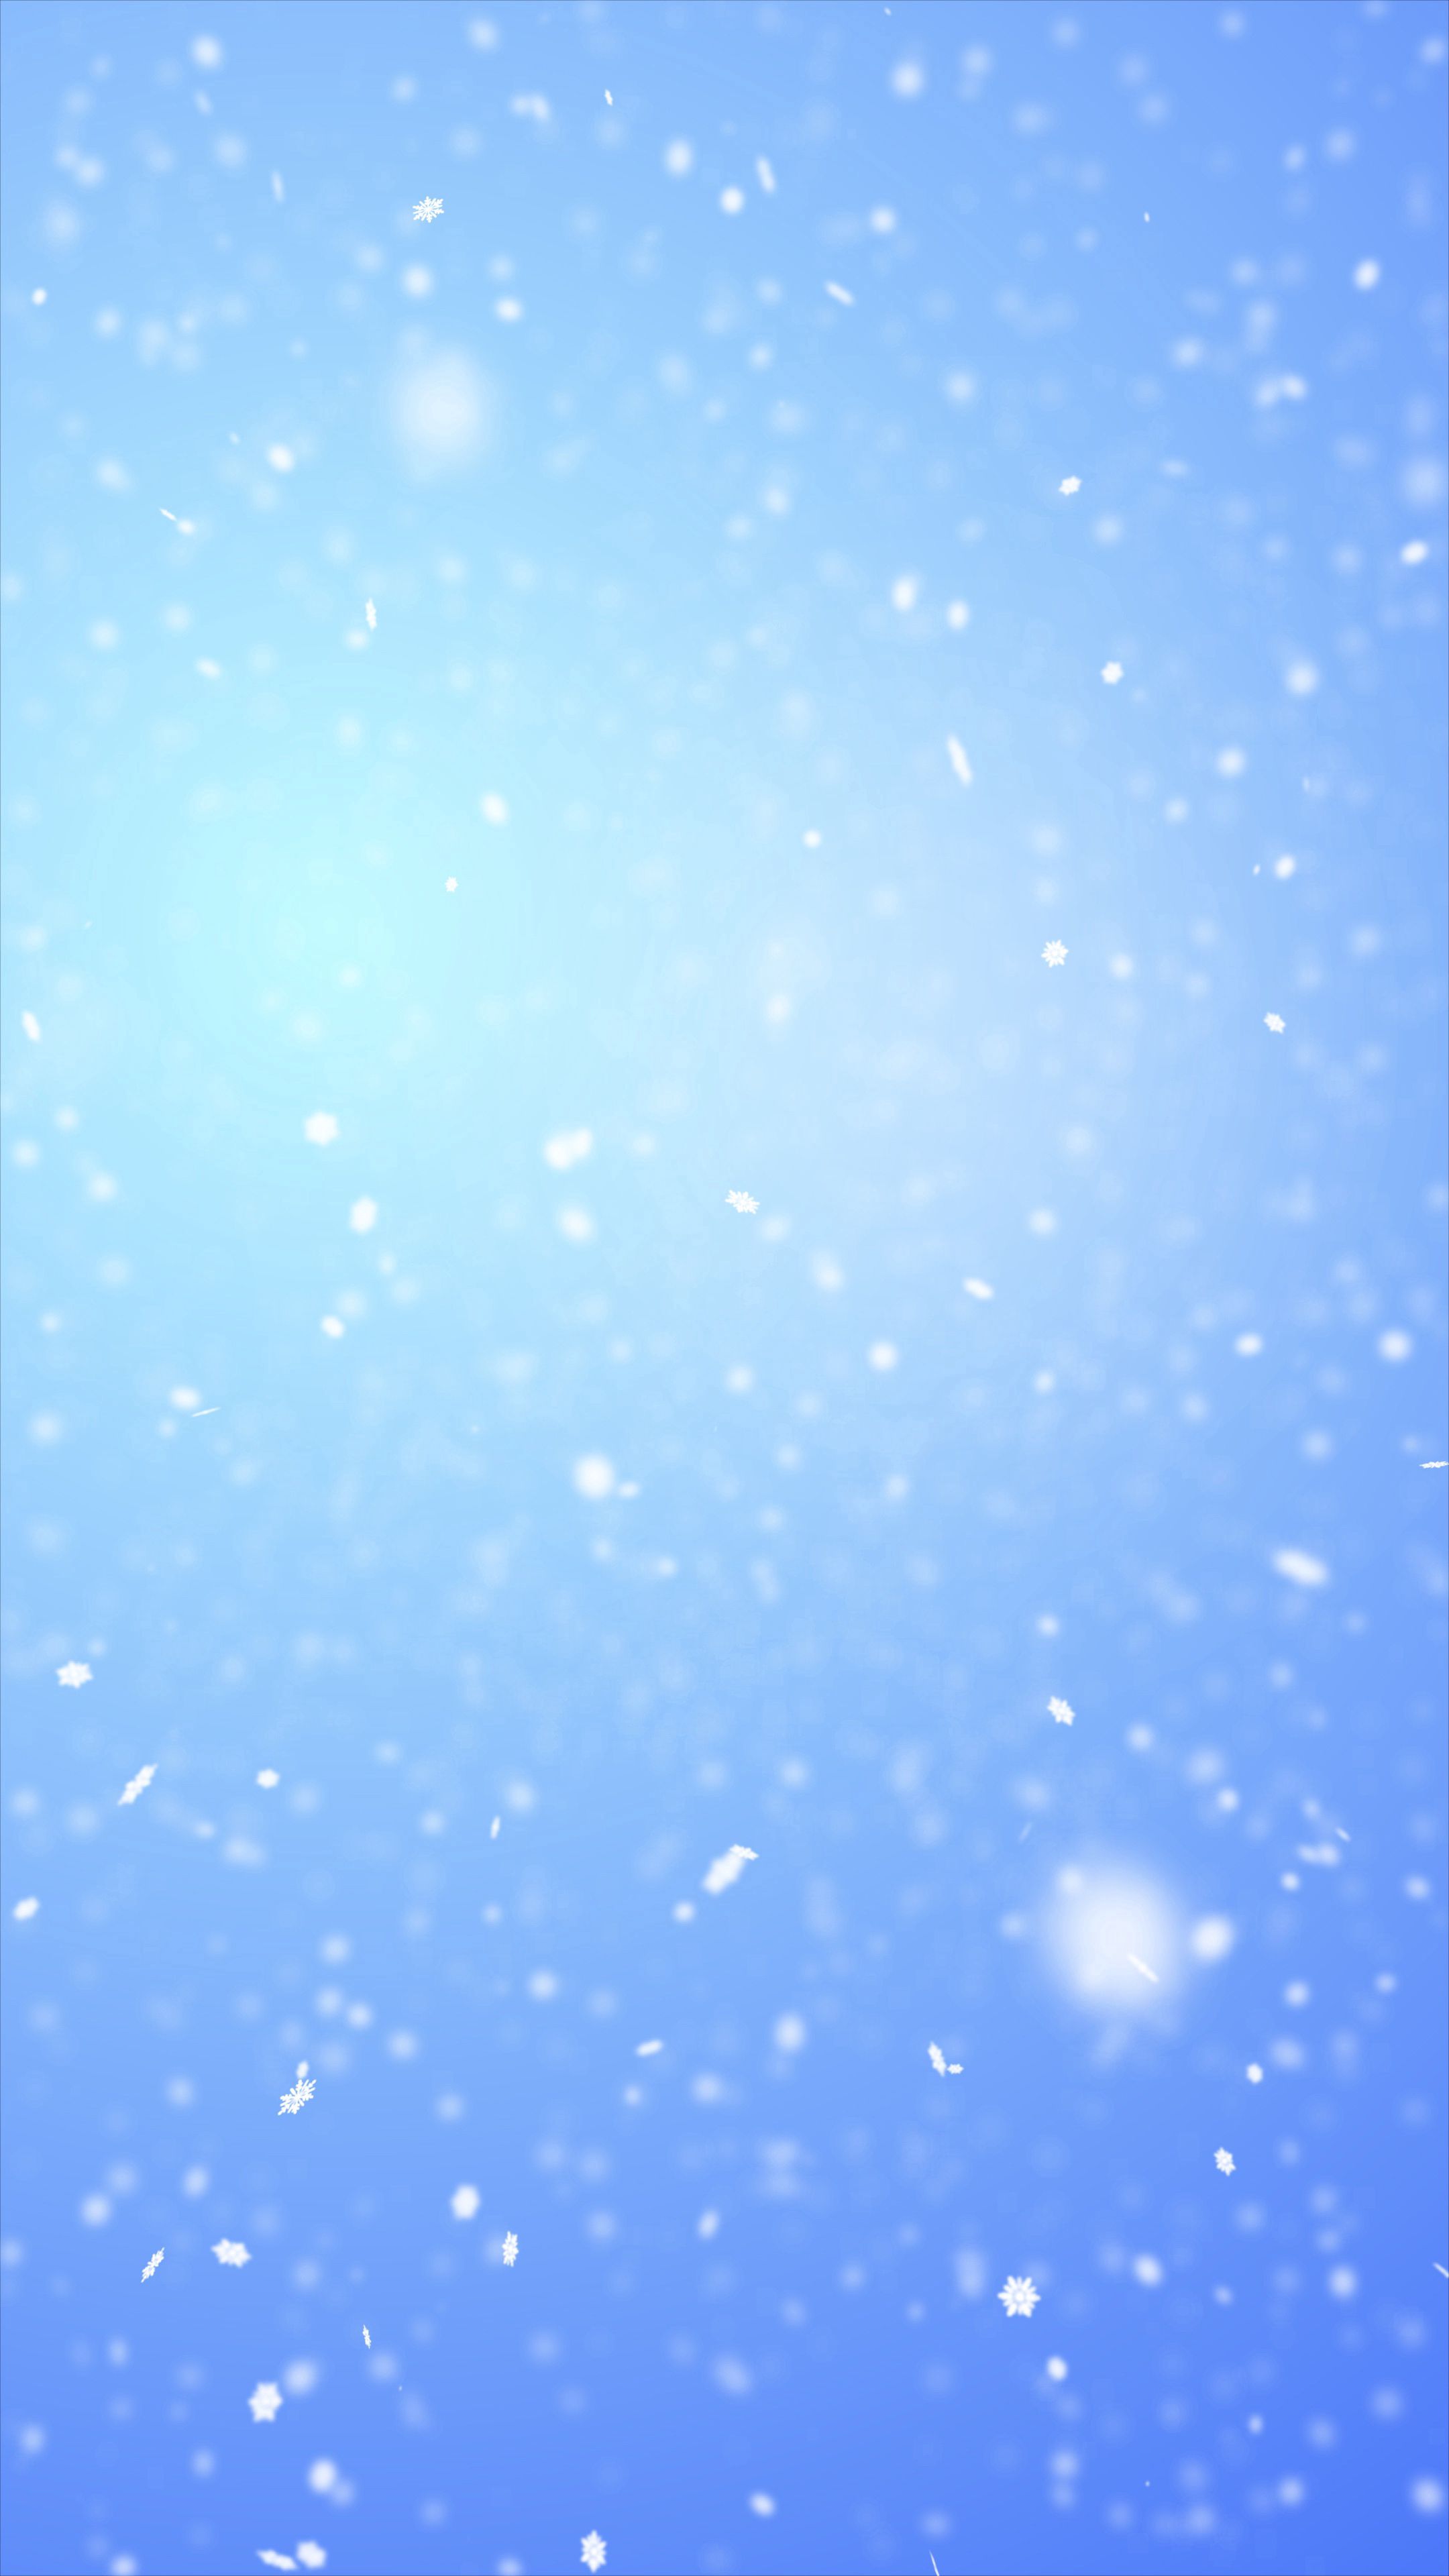 111020 Screensavers and Wallpapers Snowflakes for phone. Download winter, background, snow, snowflakes, blue, light, texture, textures, light coloured, snowfall pictures for free